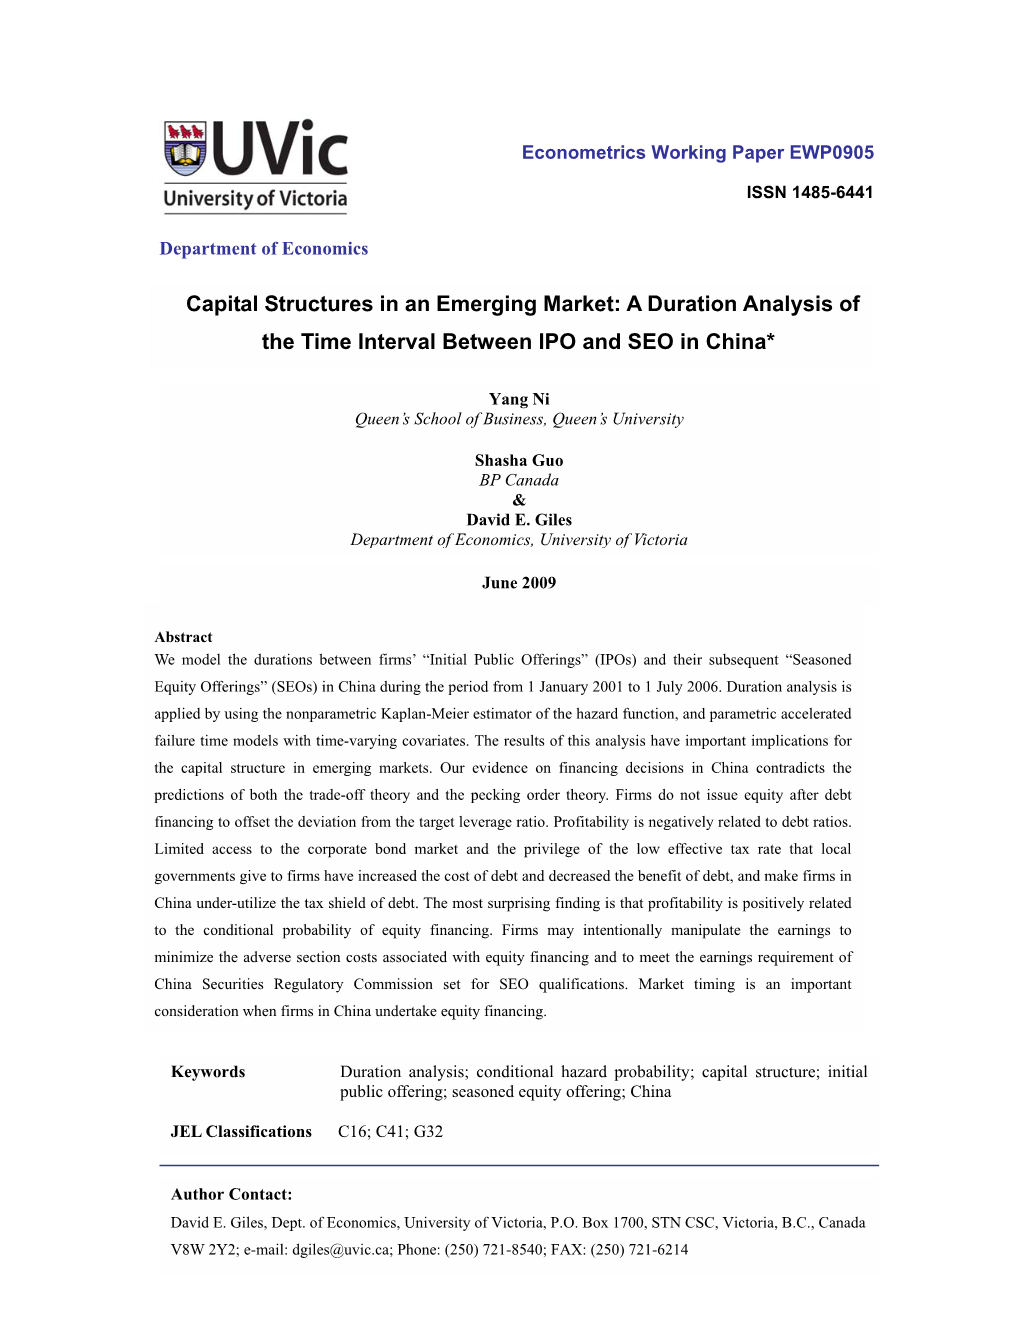 Capital Structures in an Emerging Market: a Duration Analysis of the Time Interval Between IPO and SEO in China*